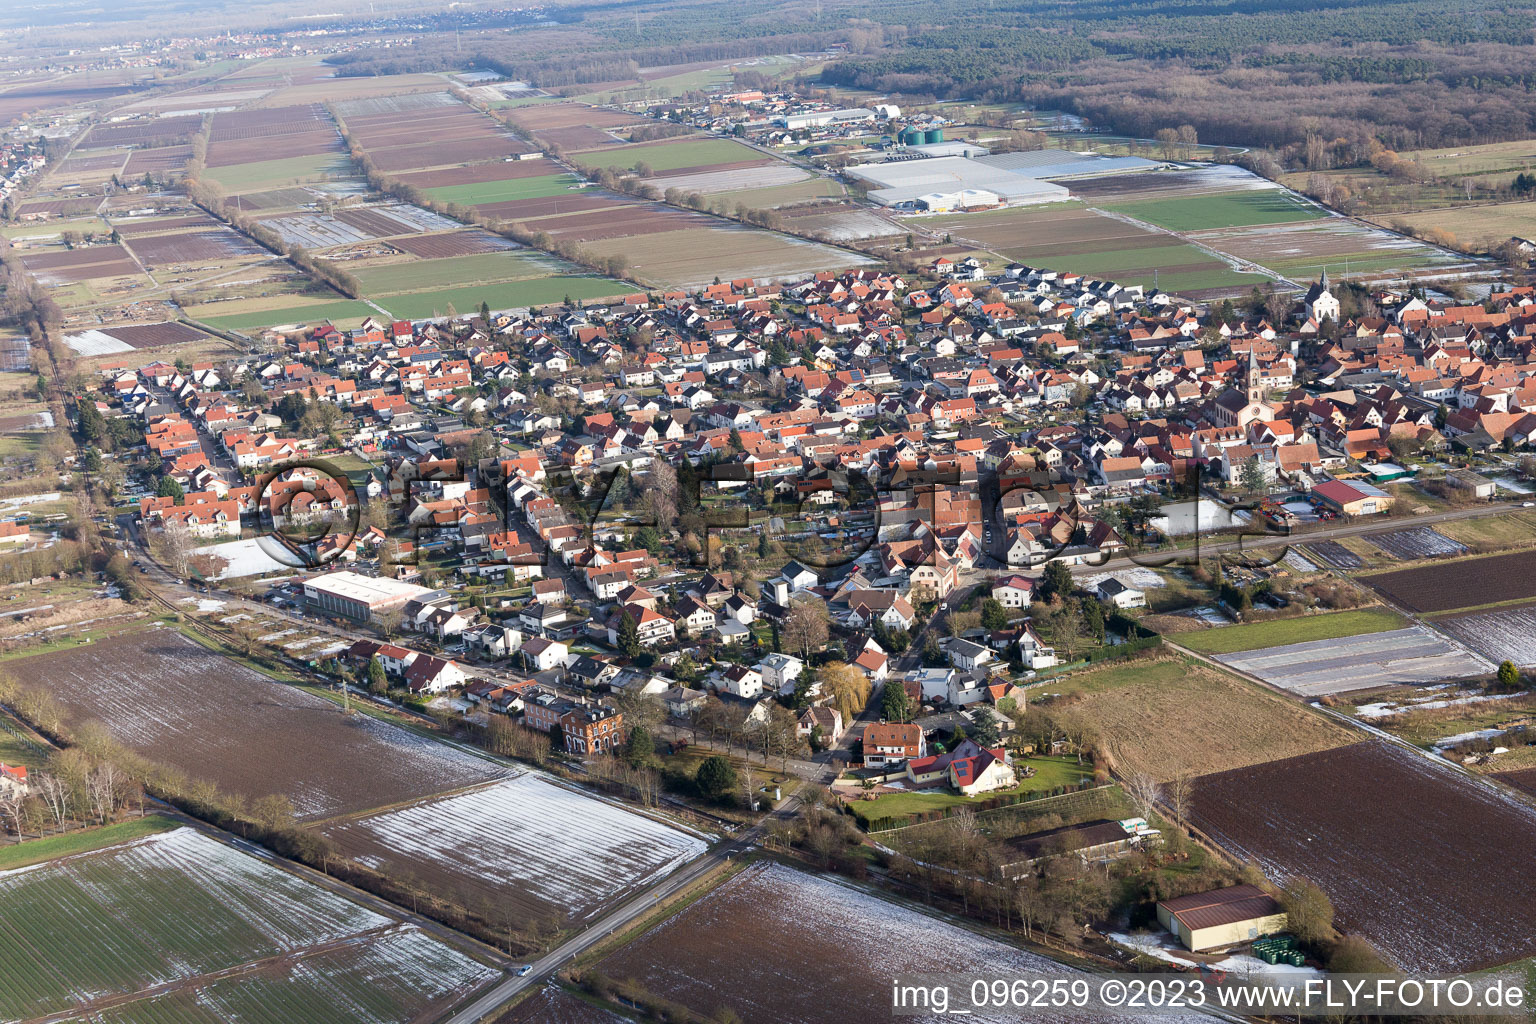 Zeiskam in the state Rhineland-Palatinate, Germany from above